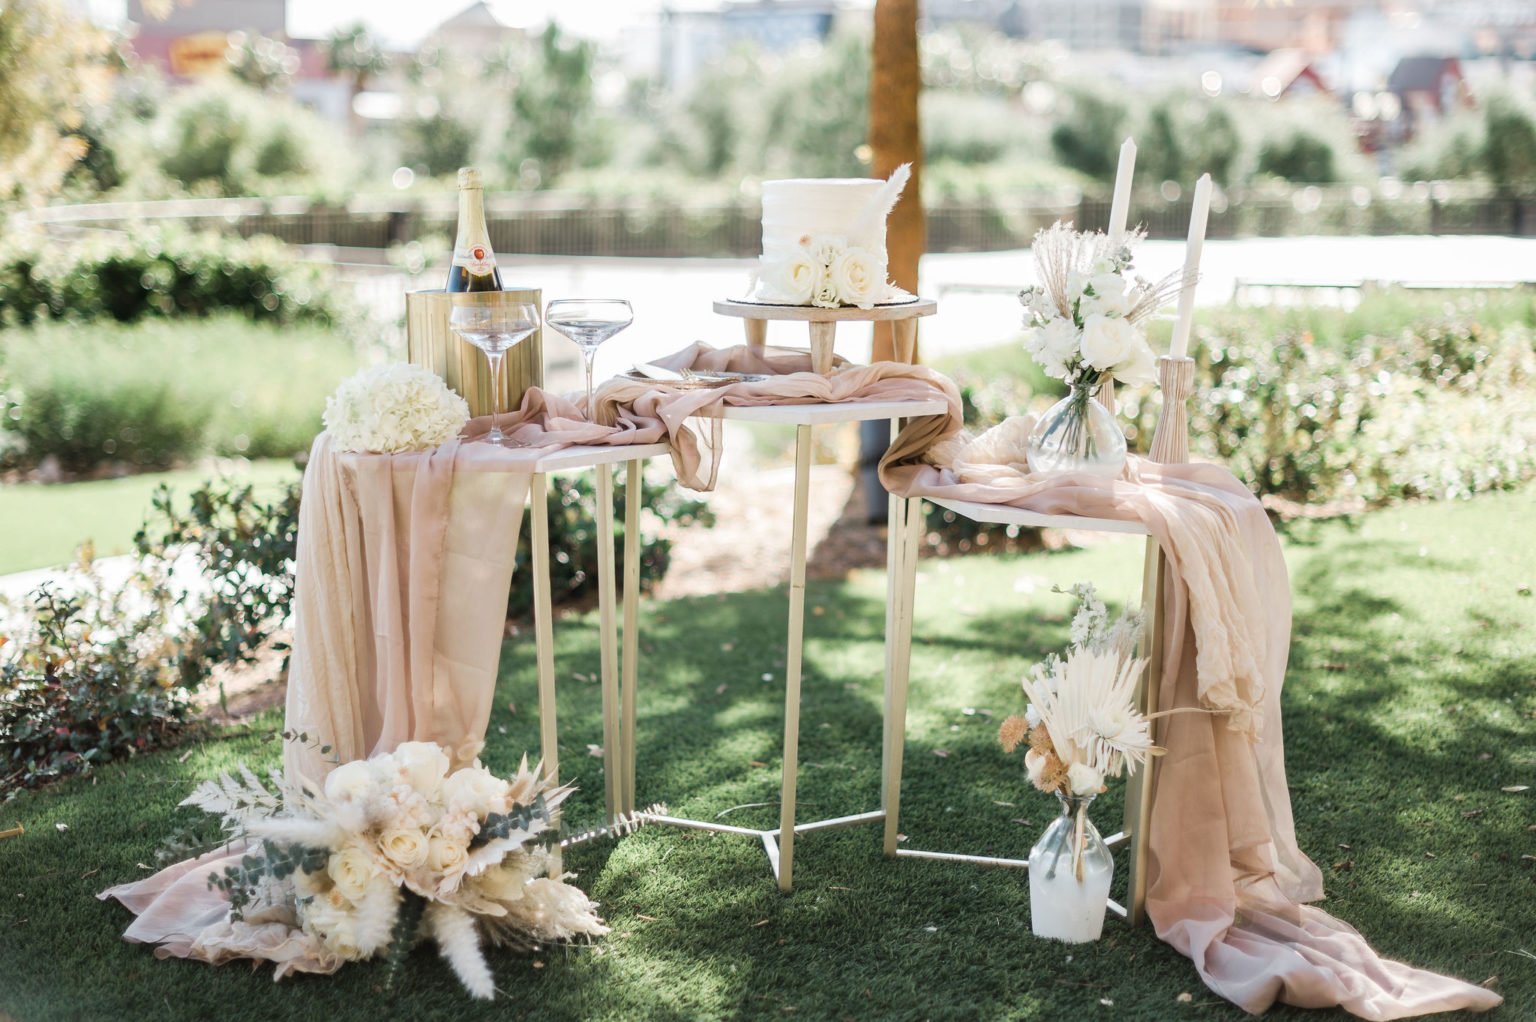 Las Vegas Elopement Packages For Two. Intimate reception setup with cake, champagne and flowers.